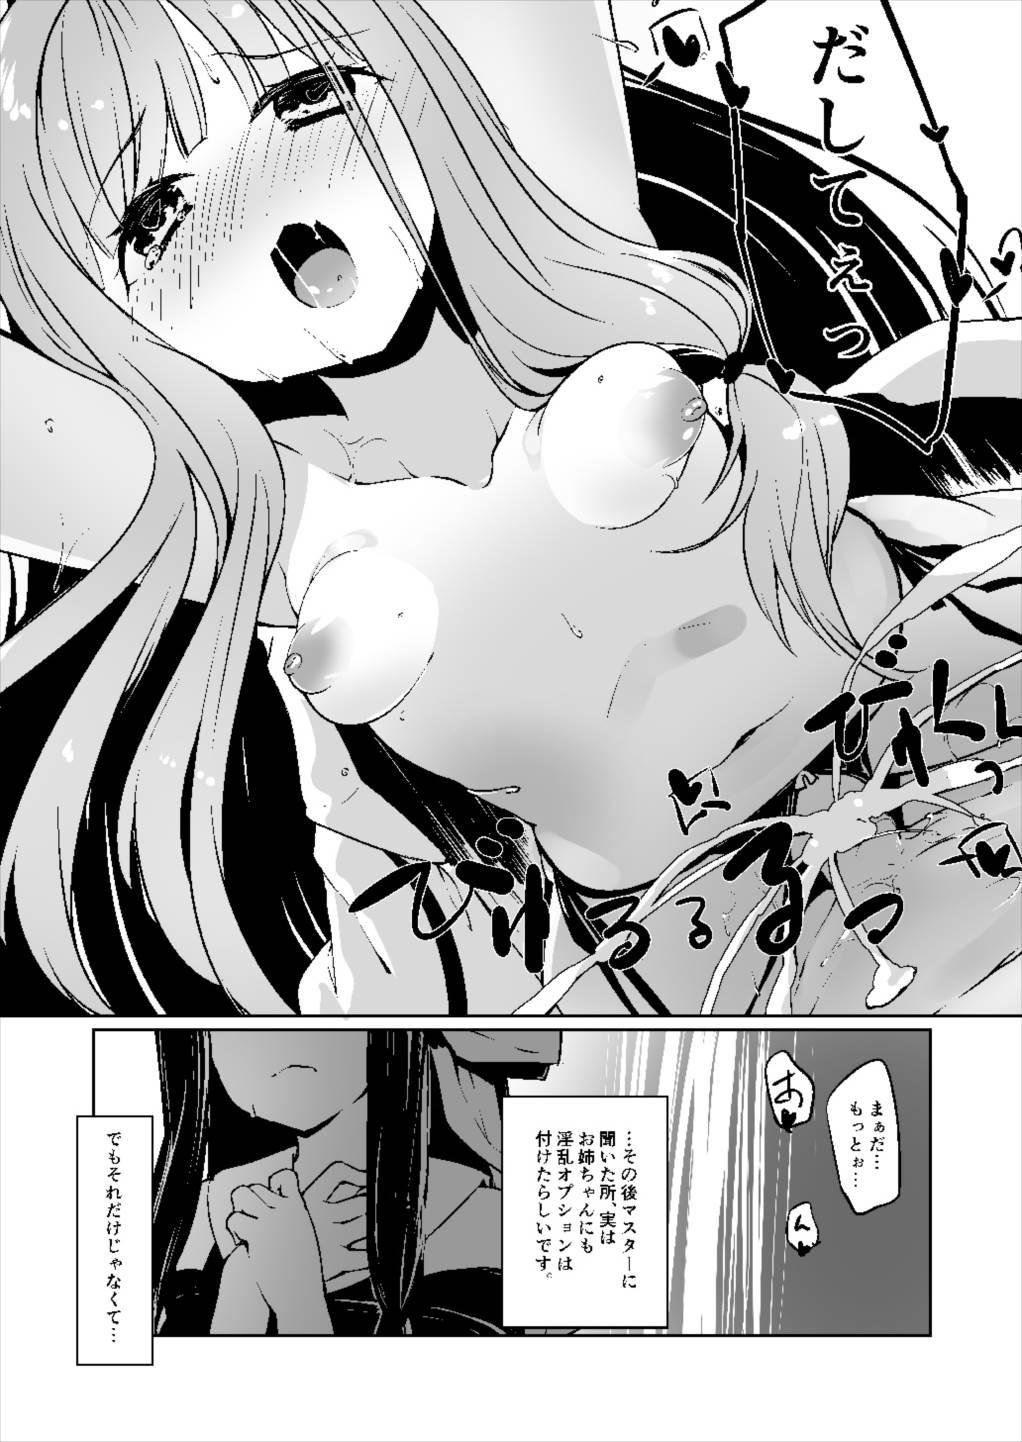 Gay Emo コトノハラバーズ VOL.06 【お姉ちゃん観察日記】 - Vocaloid Voiceroid Cream - Page 7